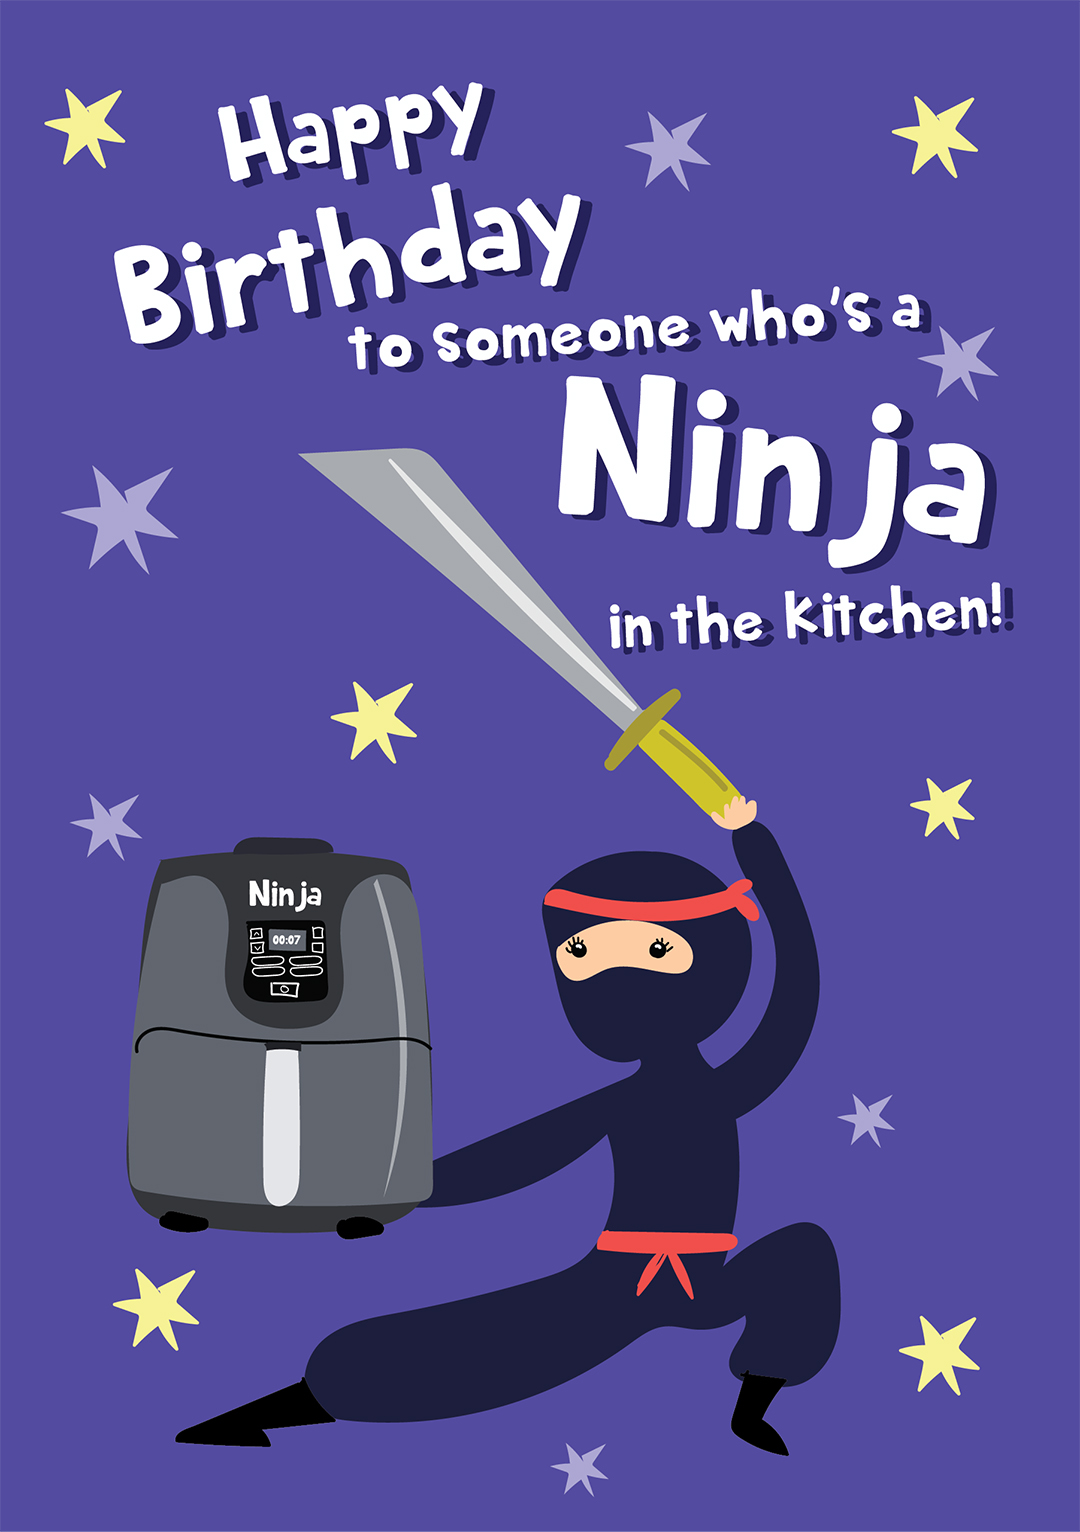 HB To Someone Who's A Ninja In The Kitchen